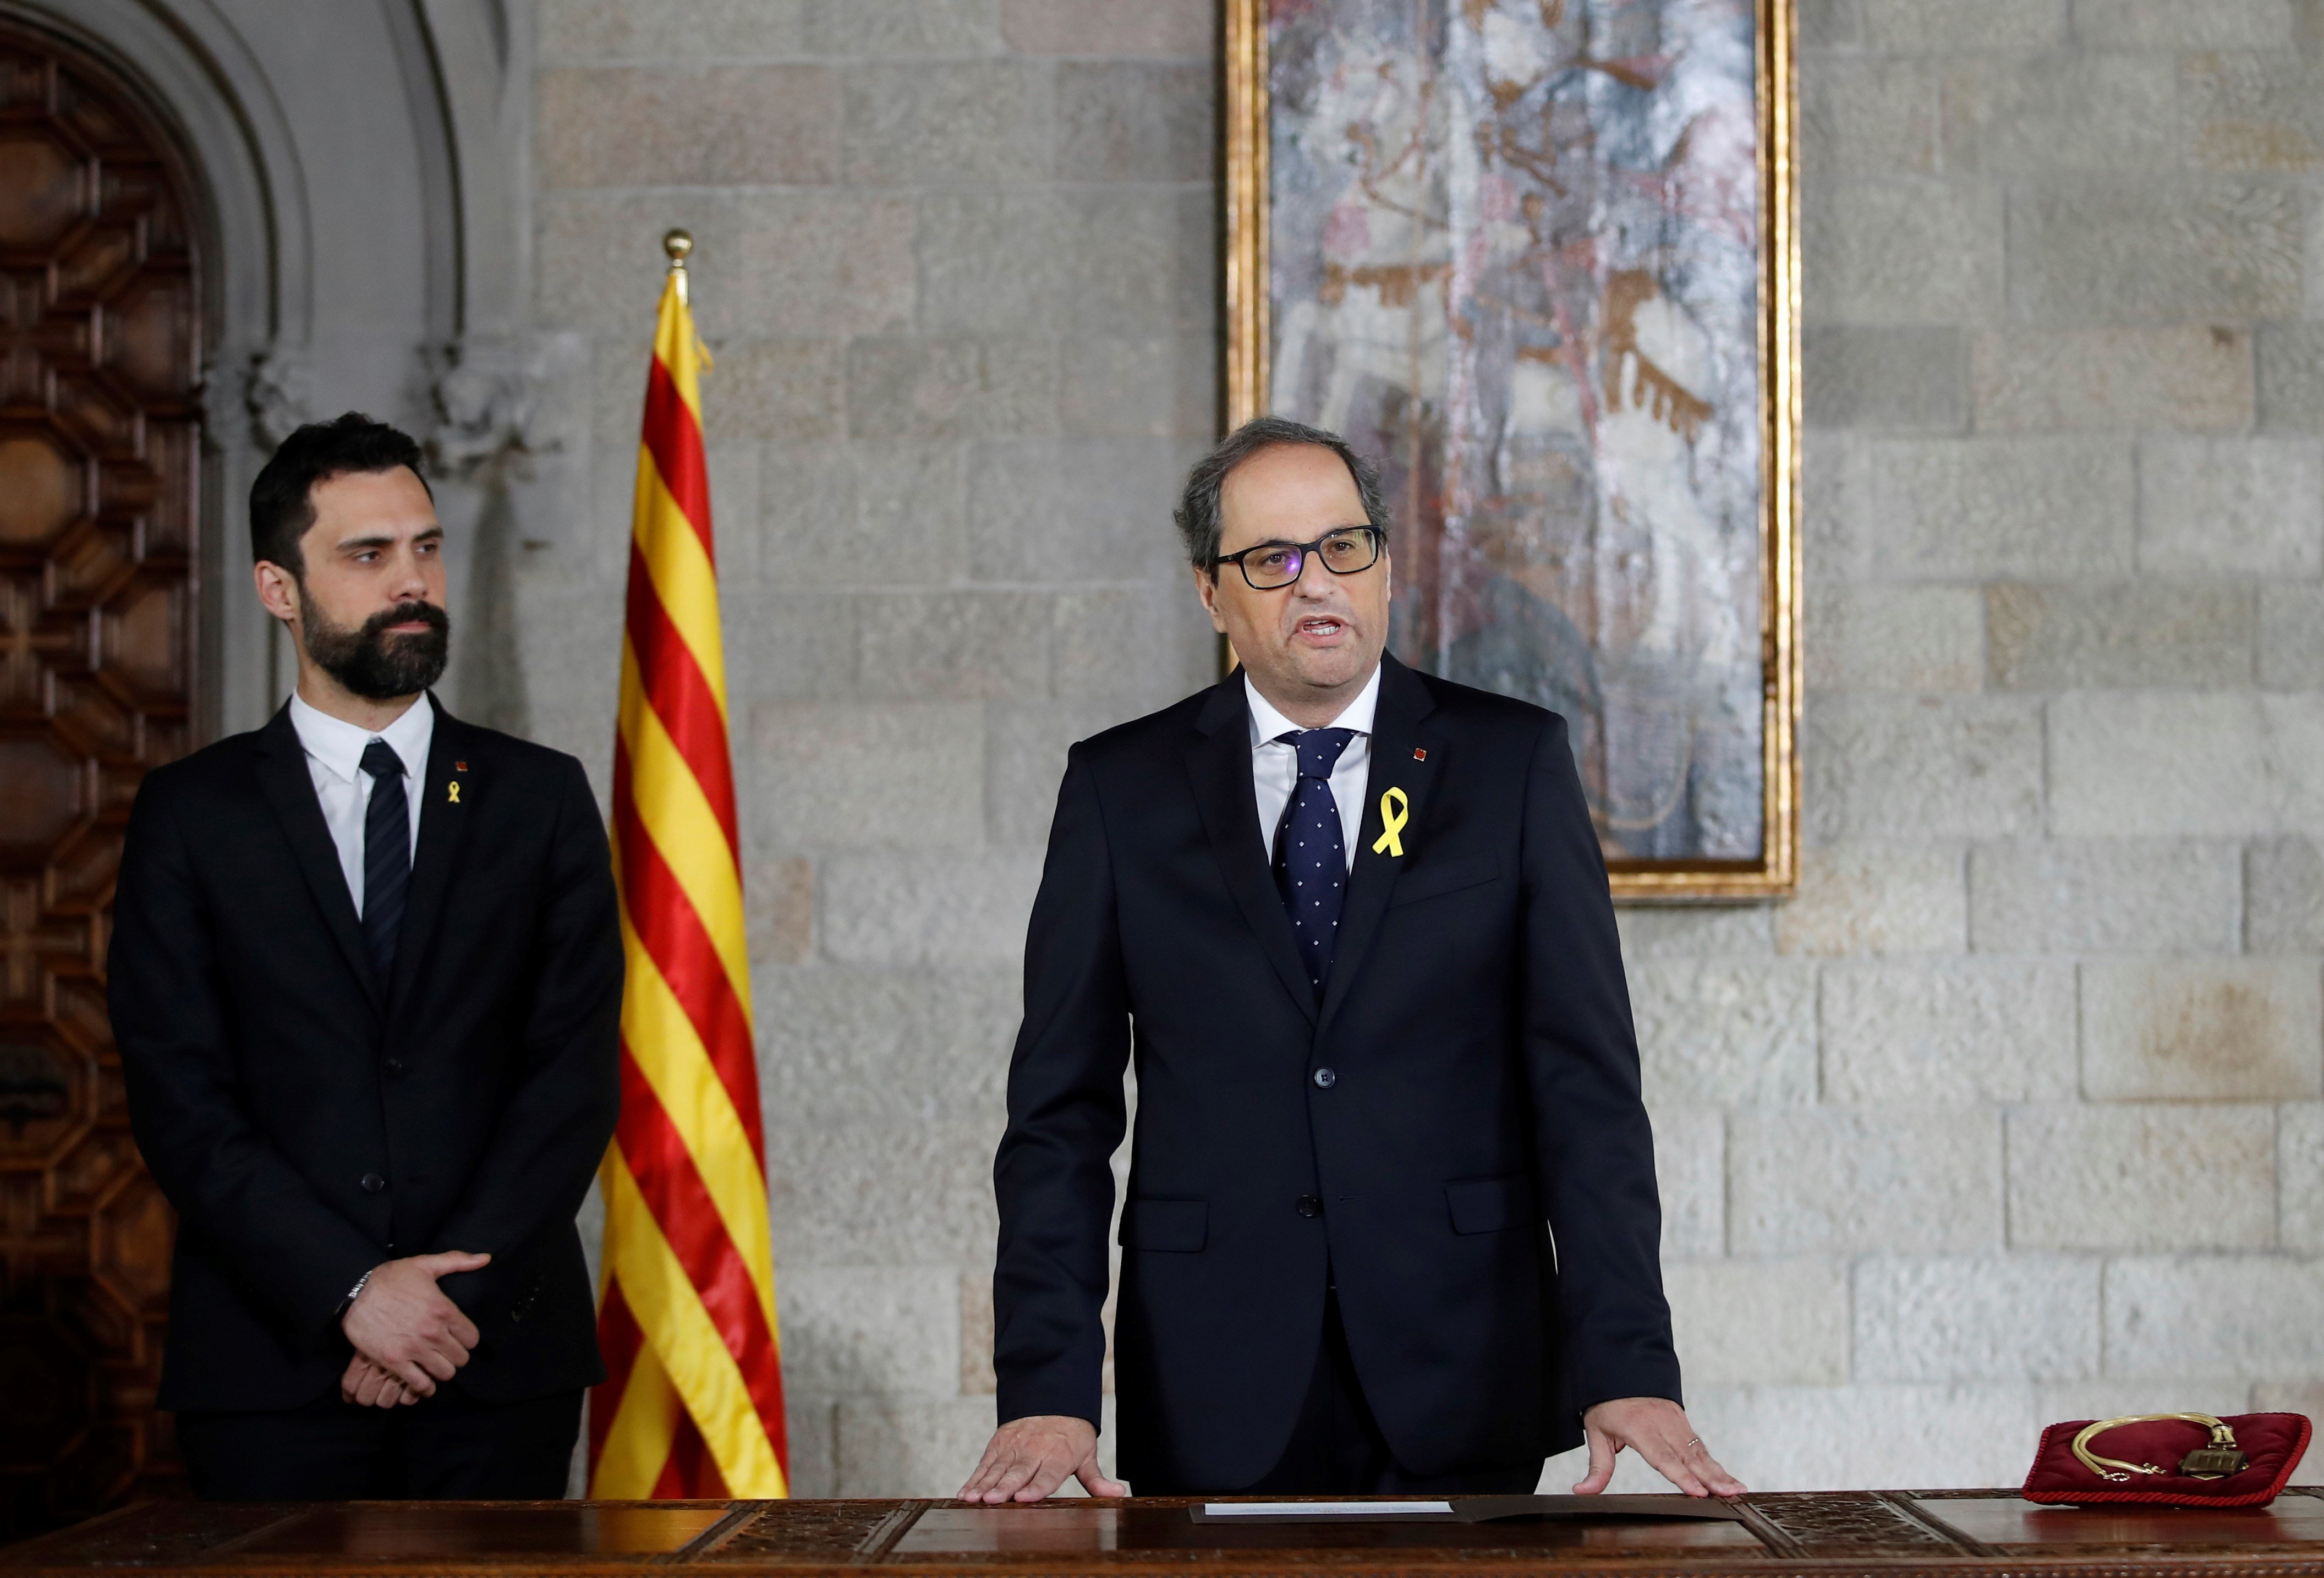 Quim Torra sworn in as Catalan president in simple ceremony to protest repression